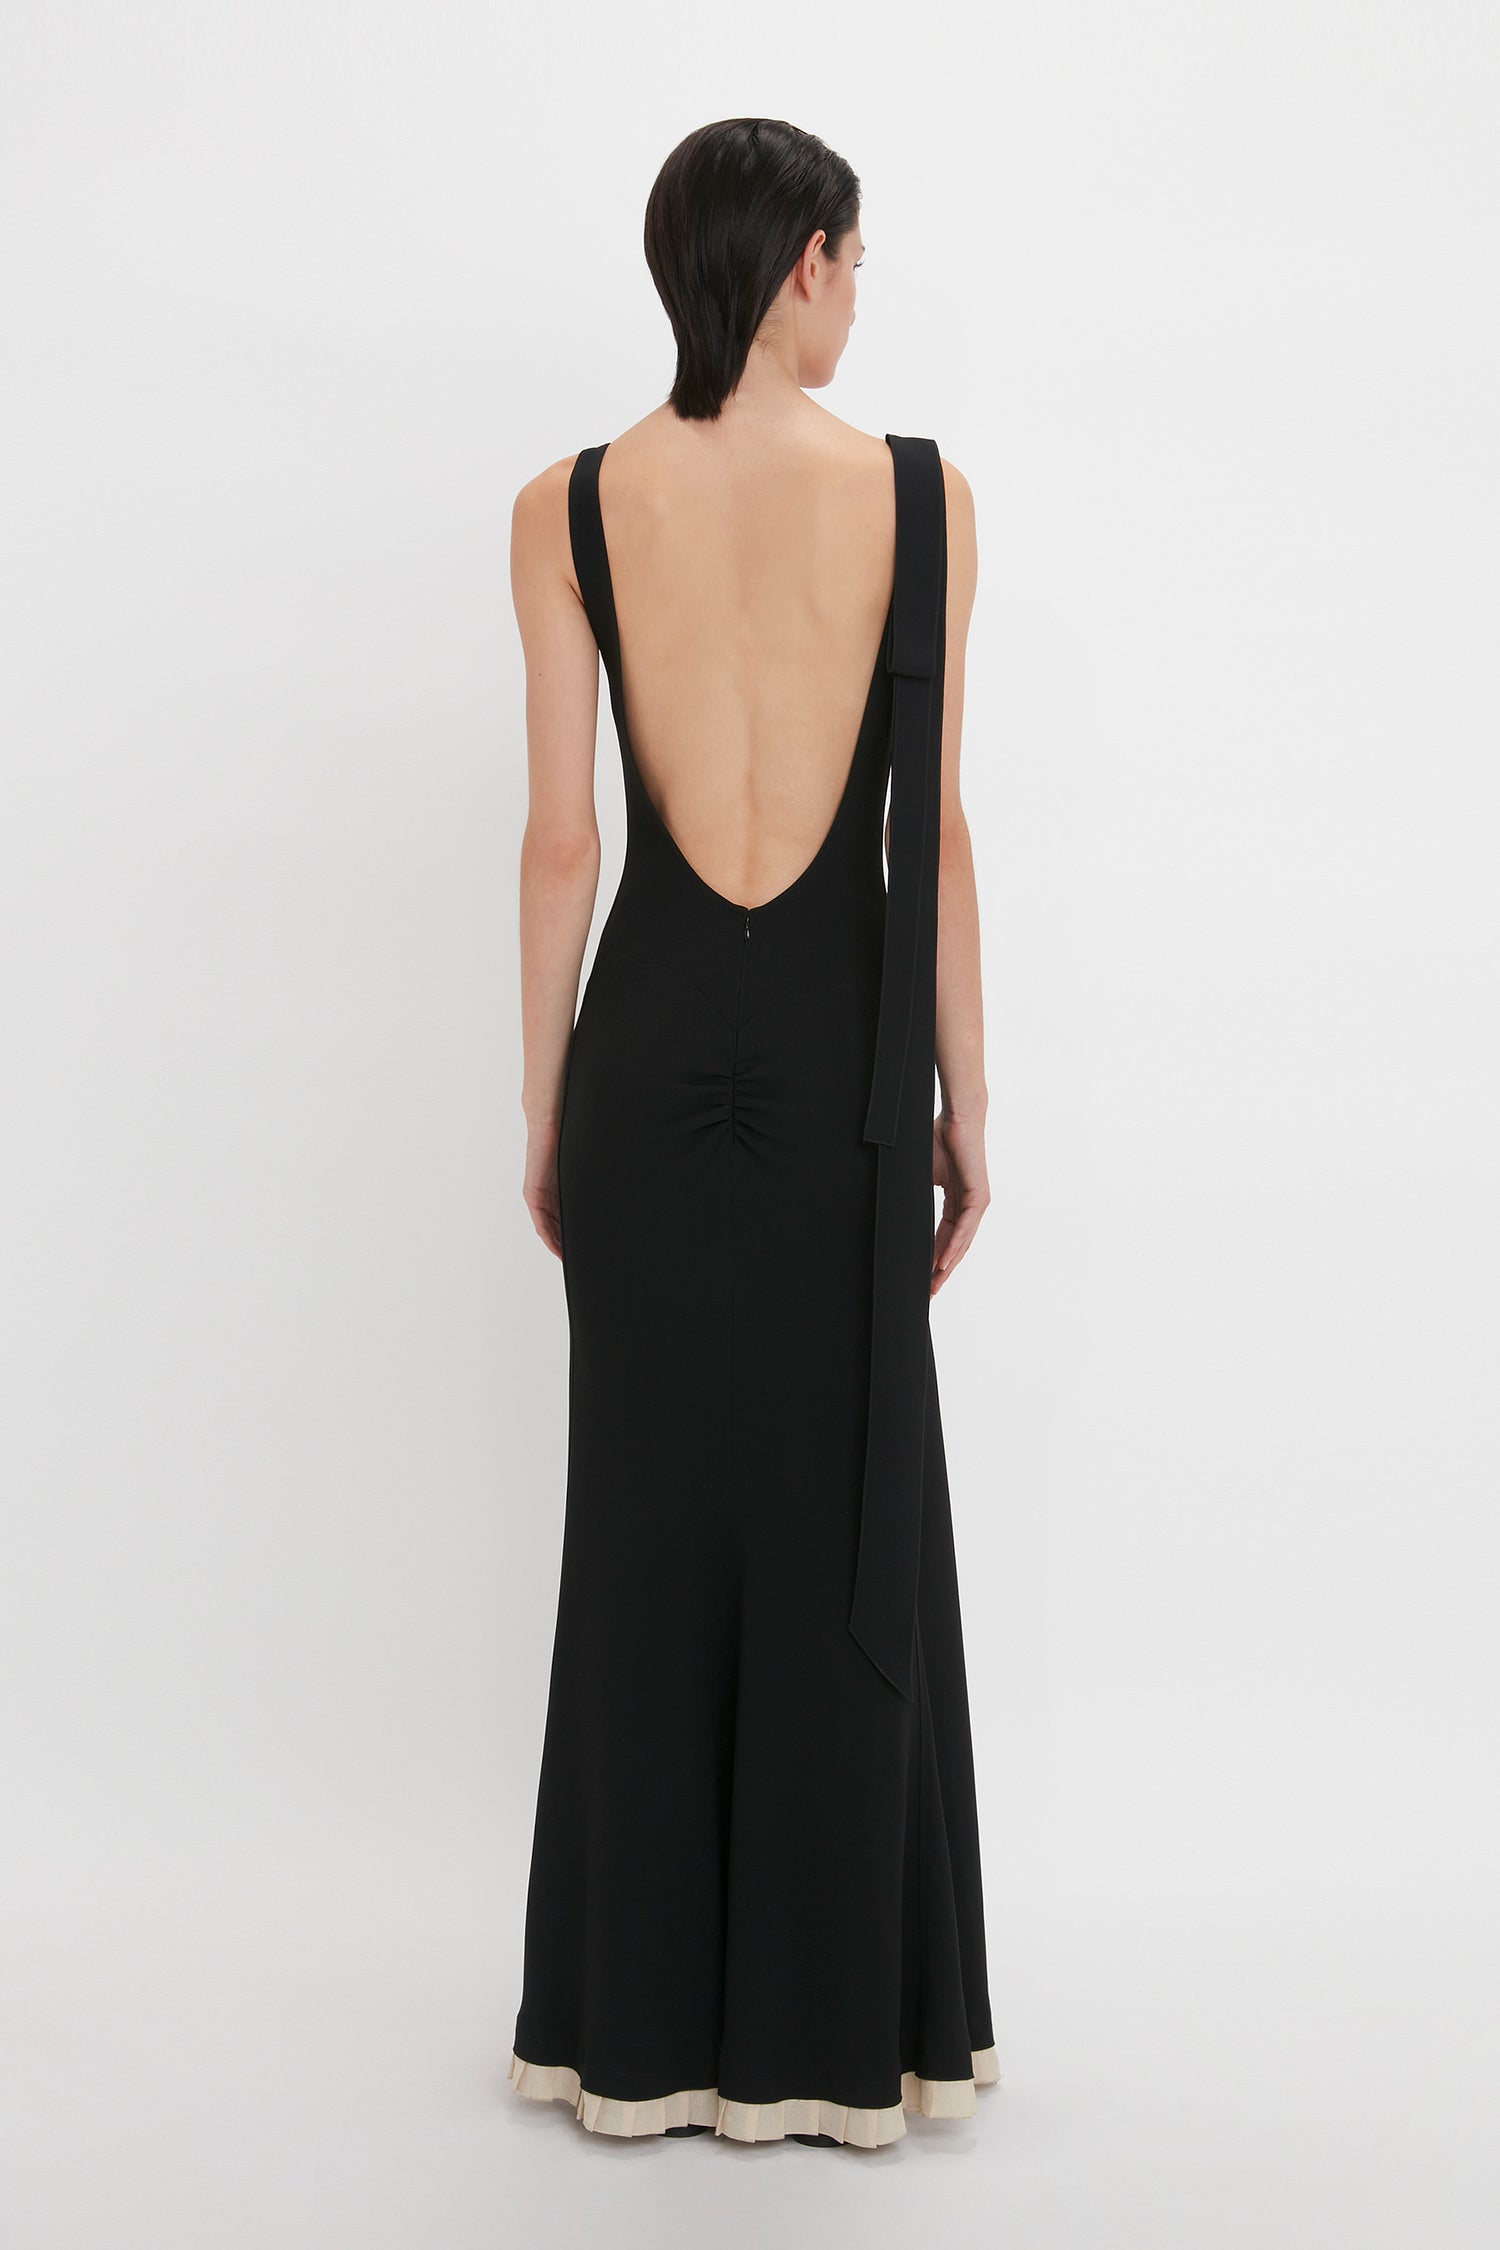 A person with short dark hair wearing a sleeveless, backless Victoria Beckham V-Neck Gathered Waist Floor-Length Gown In Black stands against a plain white background, facing away from the camera.